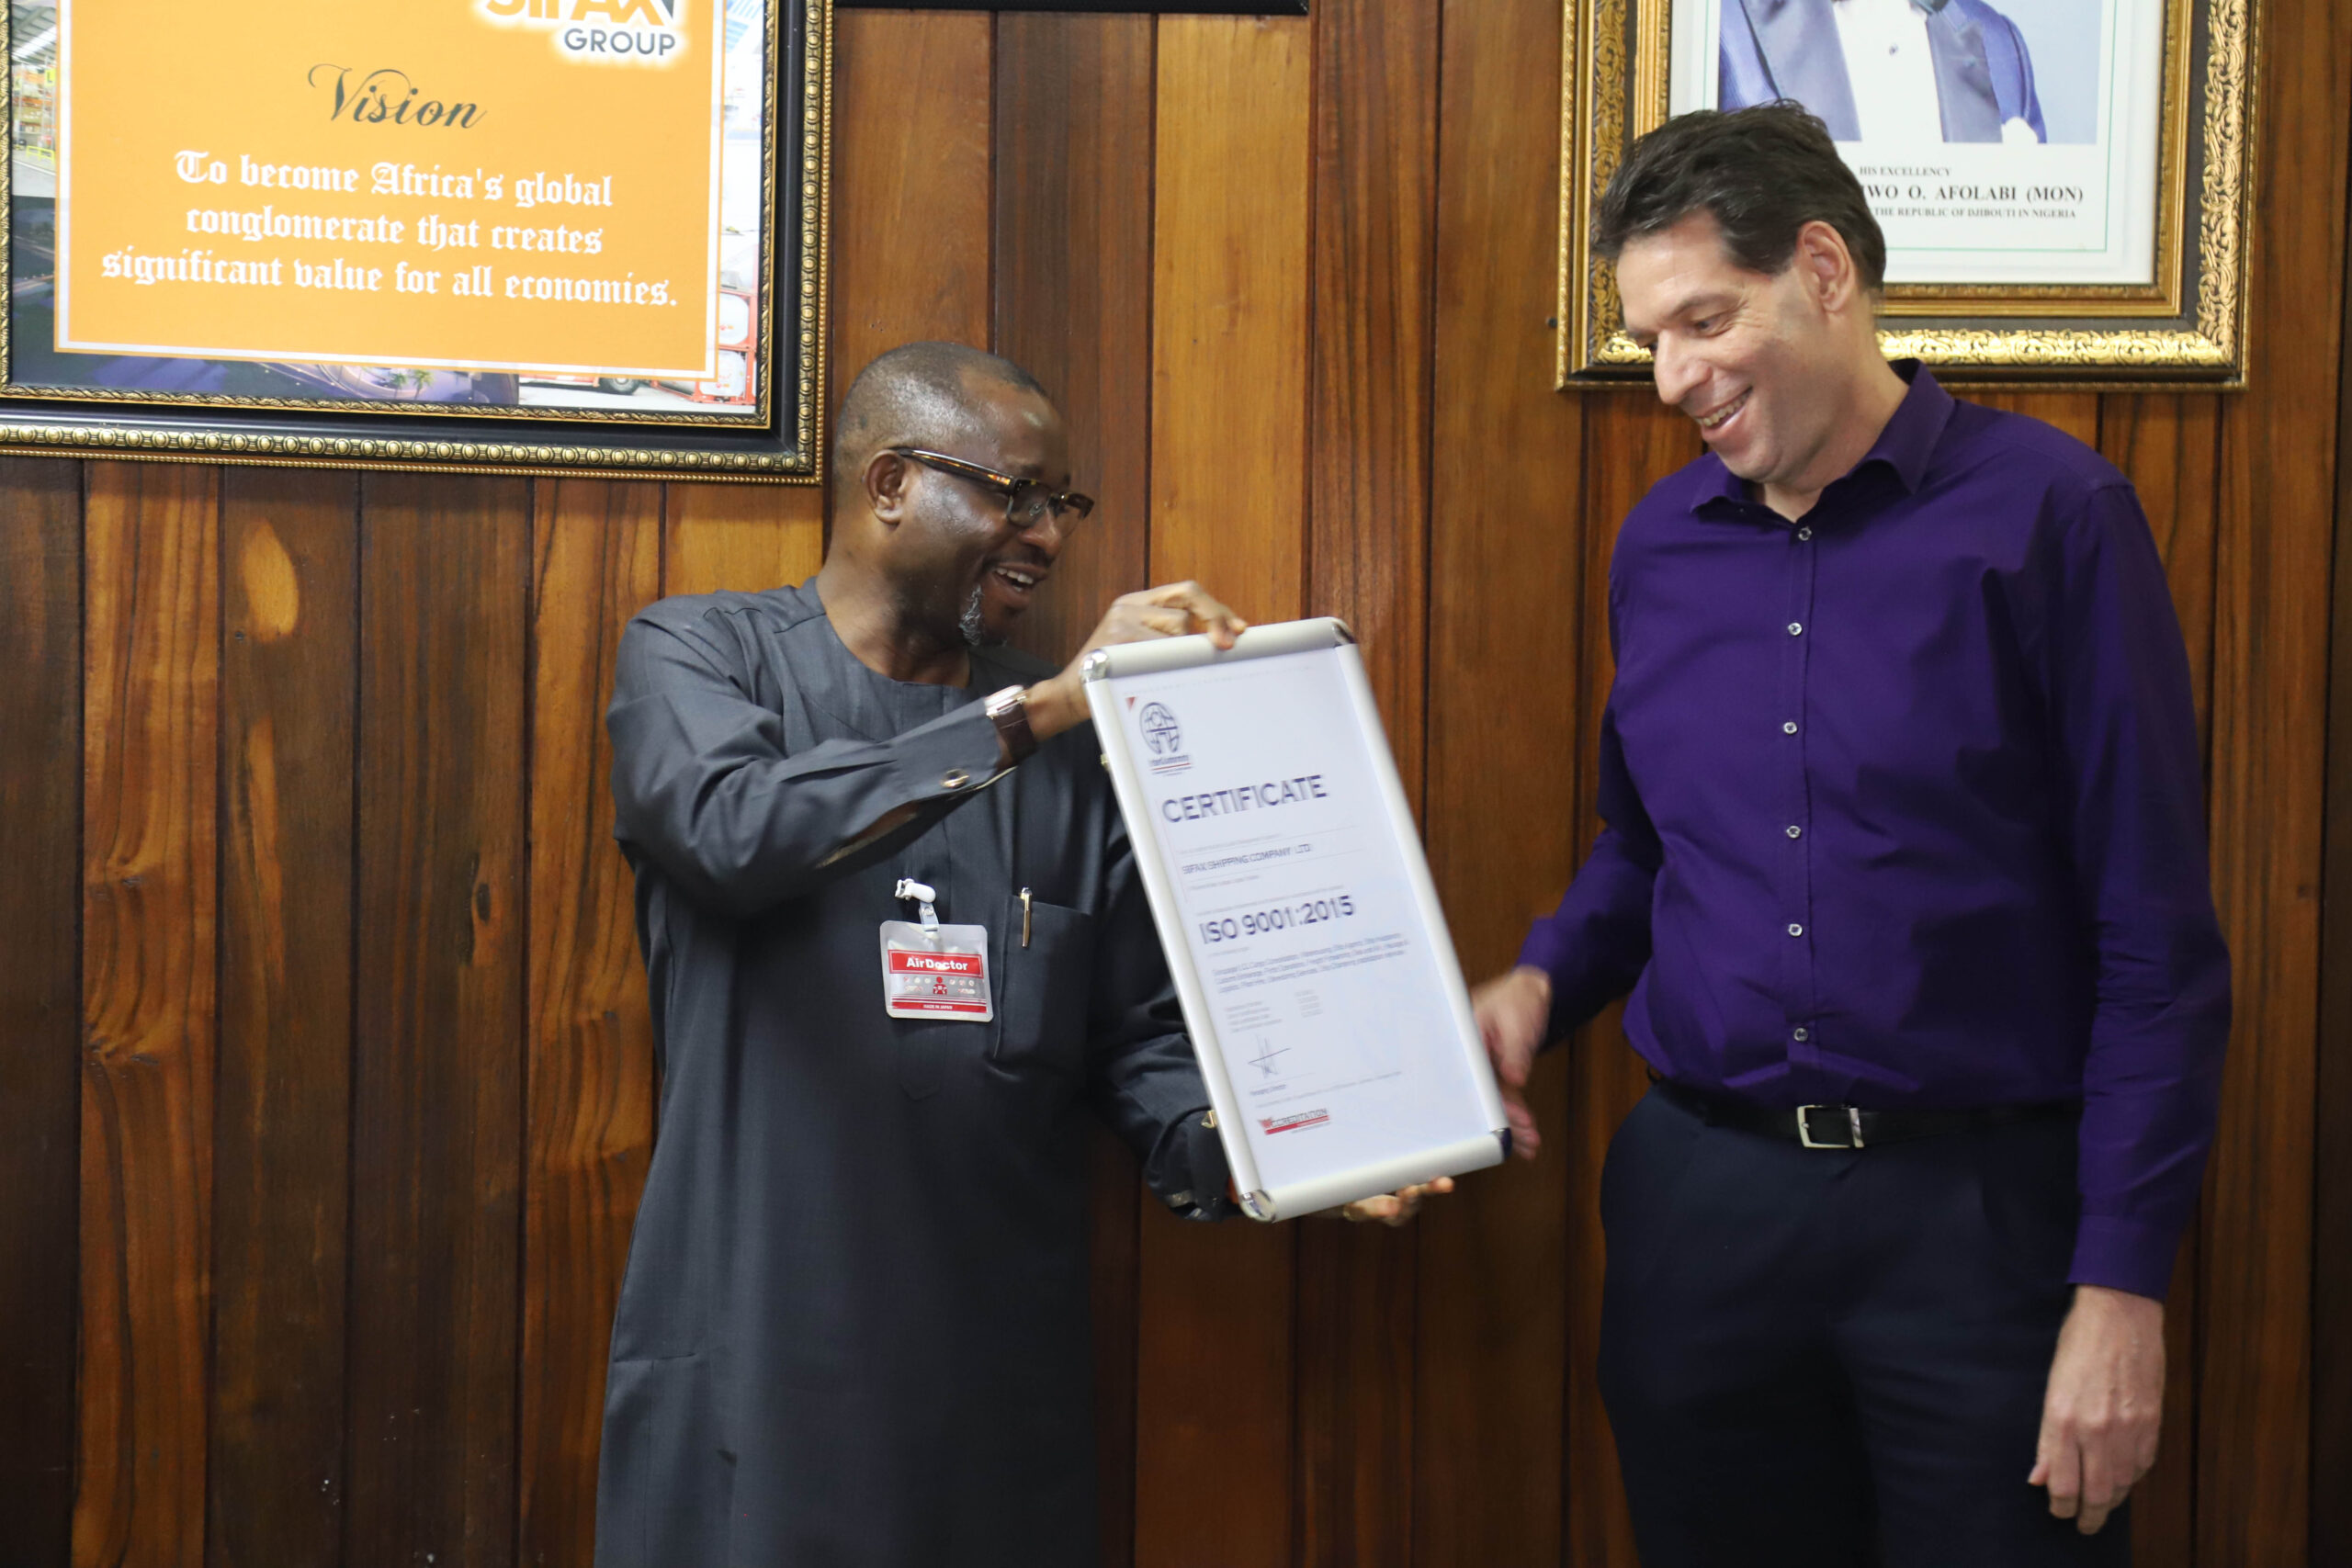 Adekunle Oyinloye, Group Managing Director, SIFAX Group presenting one of the ISO 9001:2015 certificates to Paul vd Linden, Managing Director, SIFAX Logistics Company Limited.